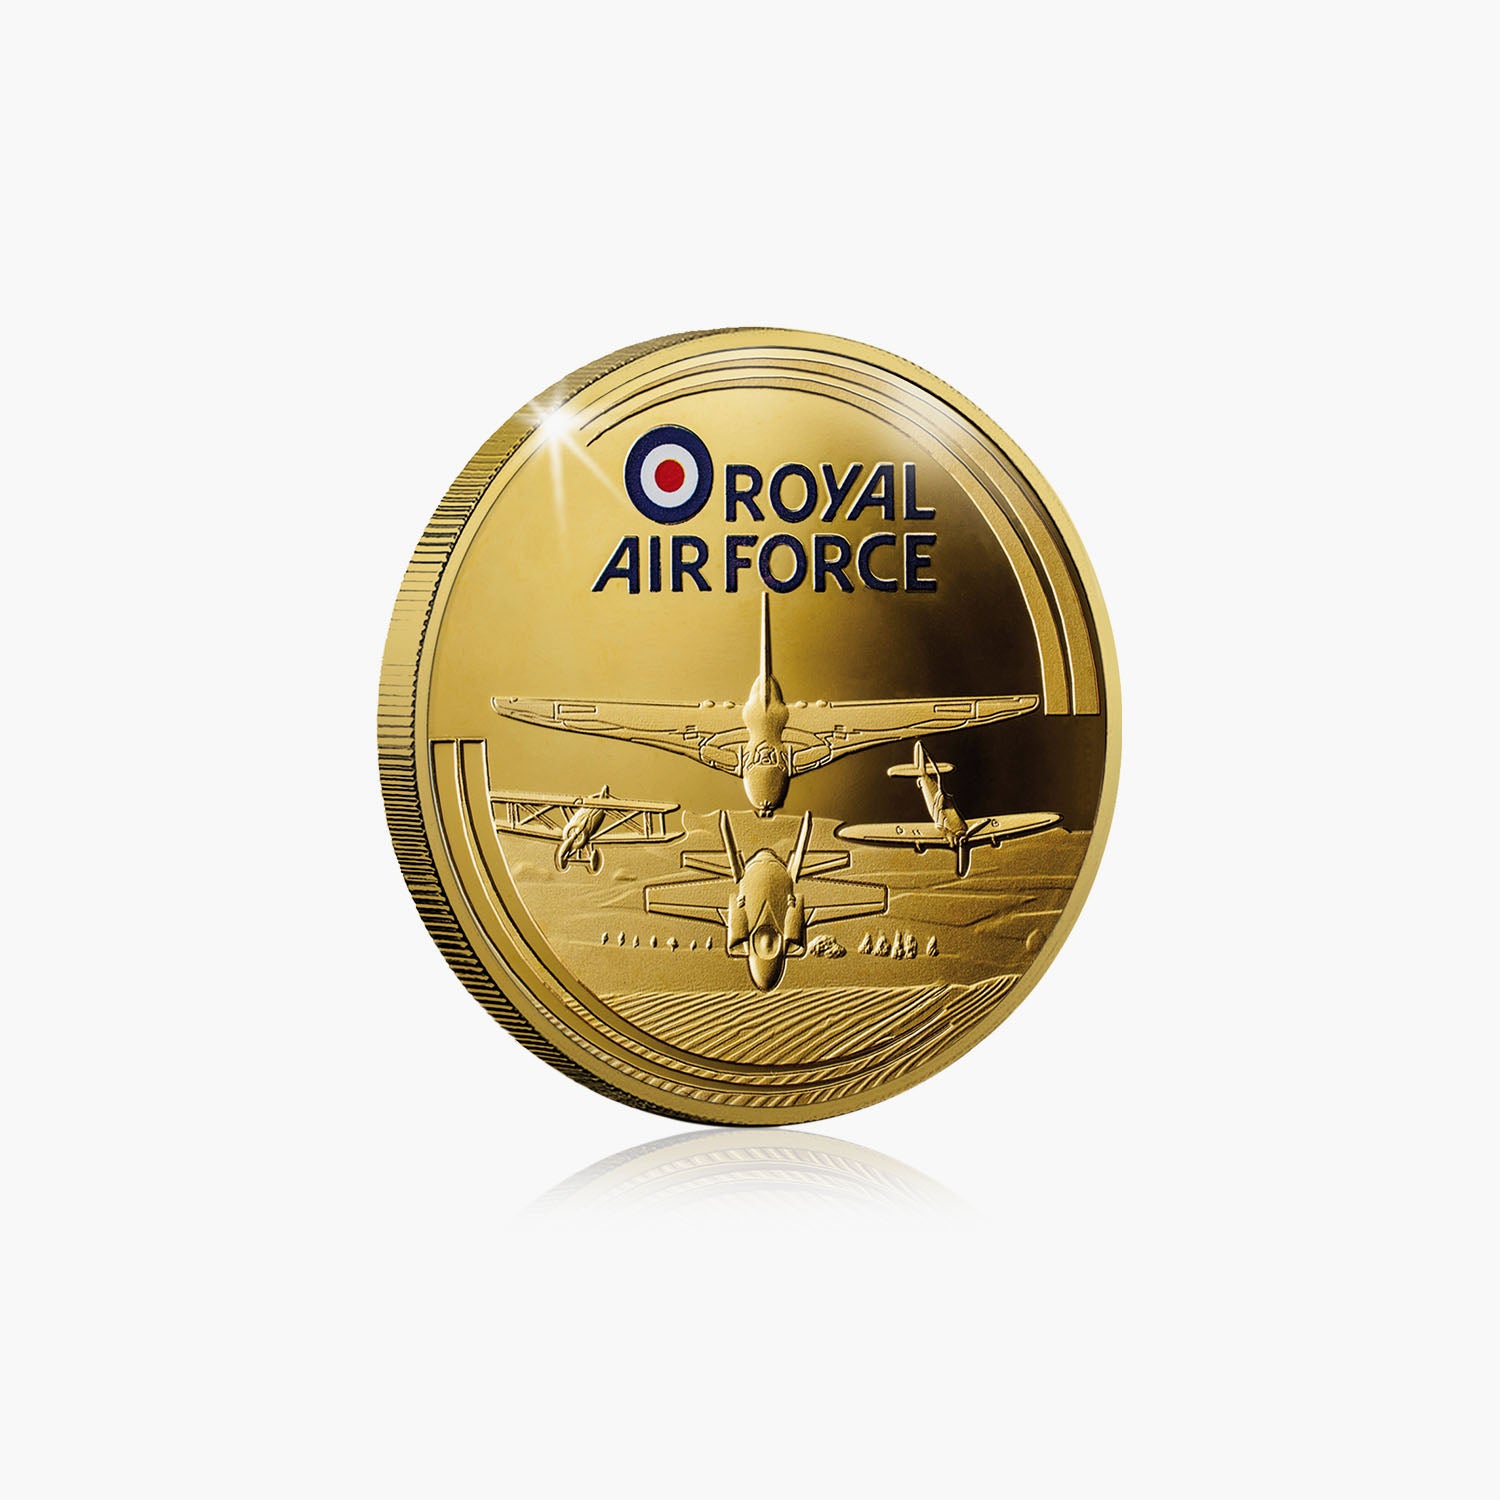 Eurofighter Typhoon Gold-Plated Commemorative